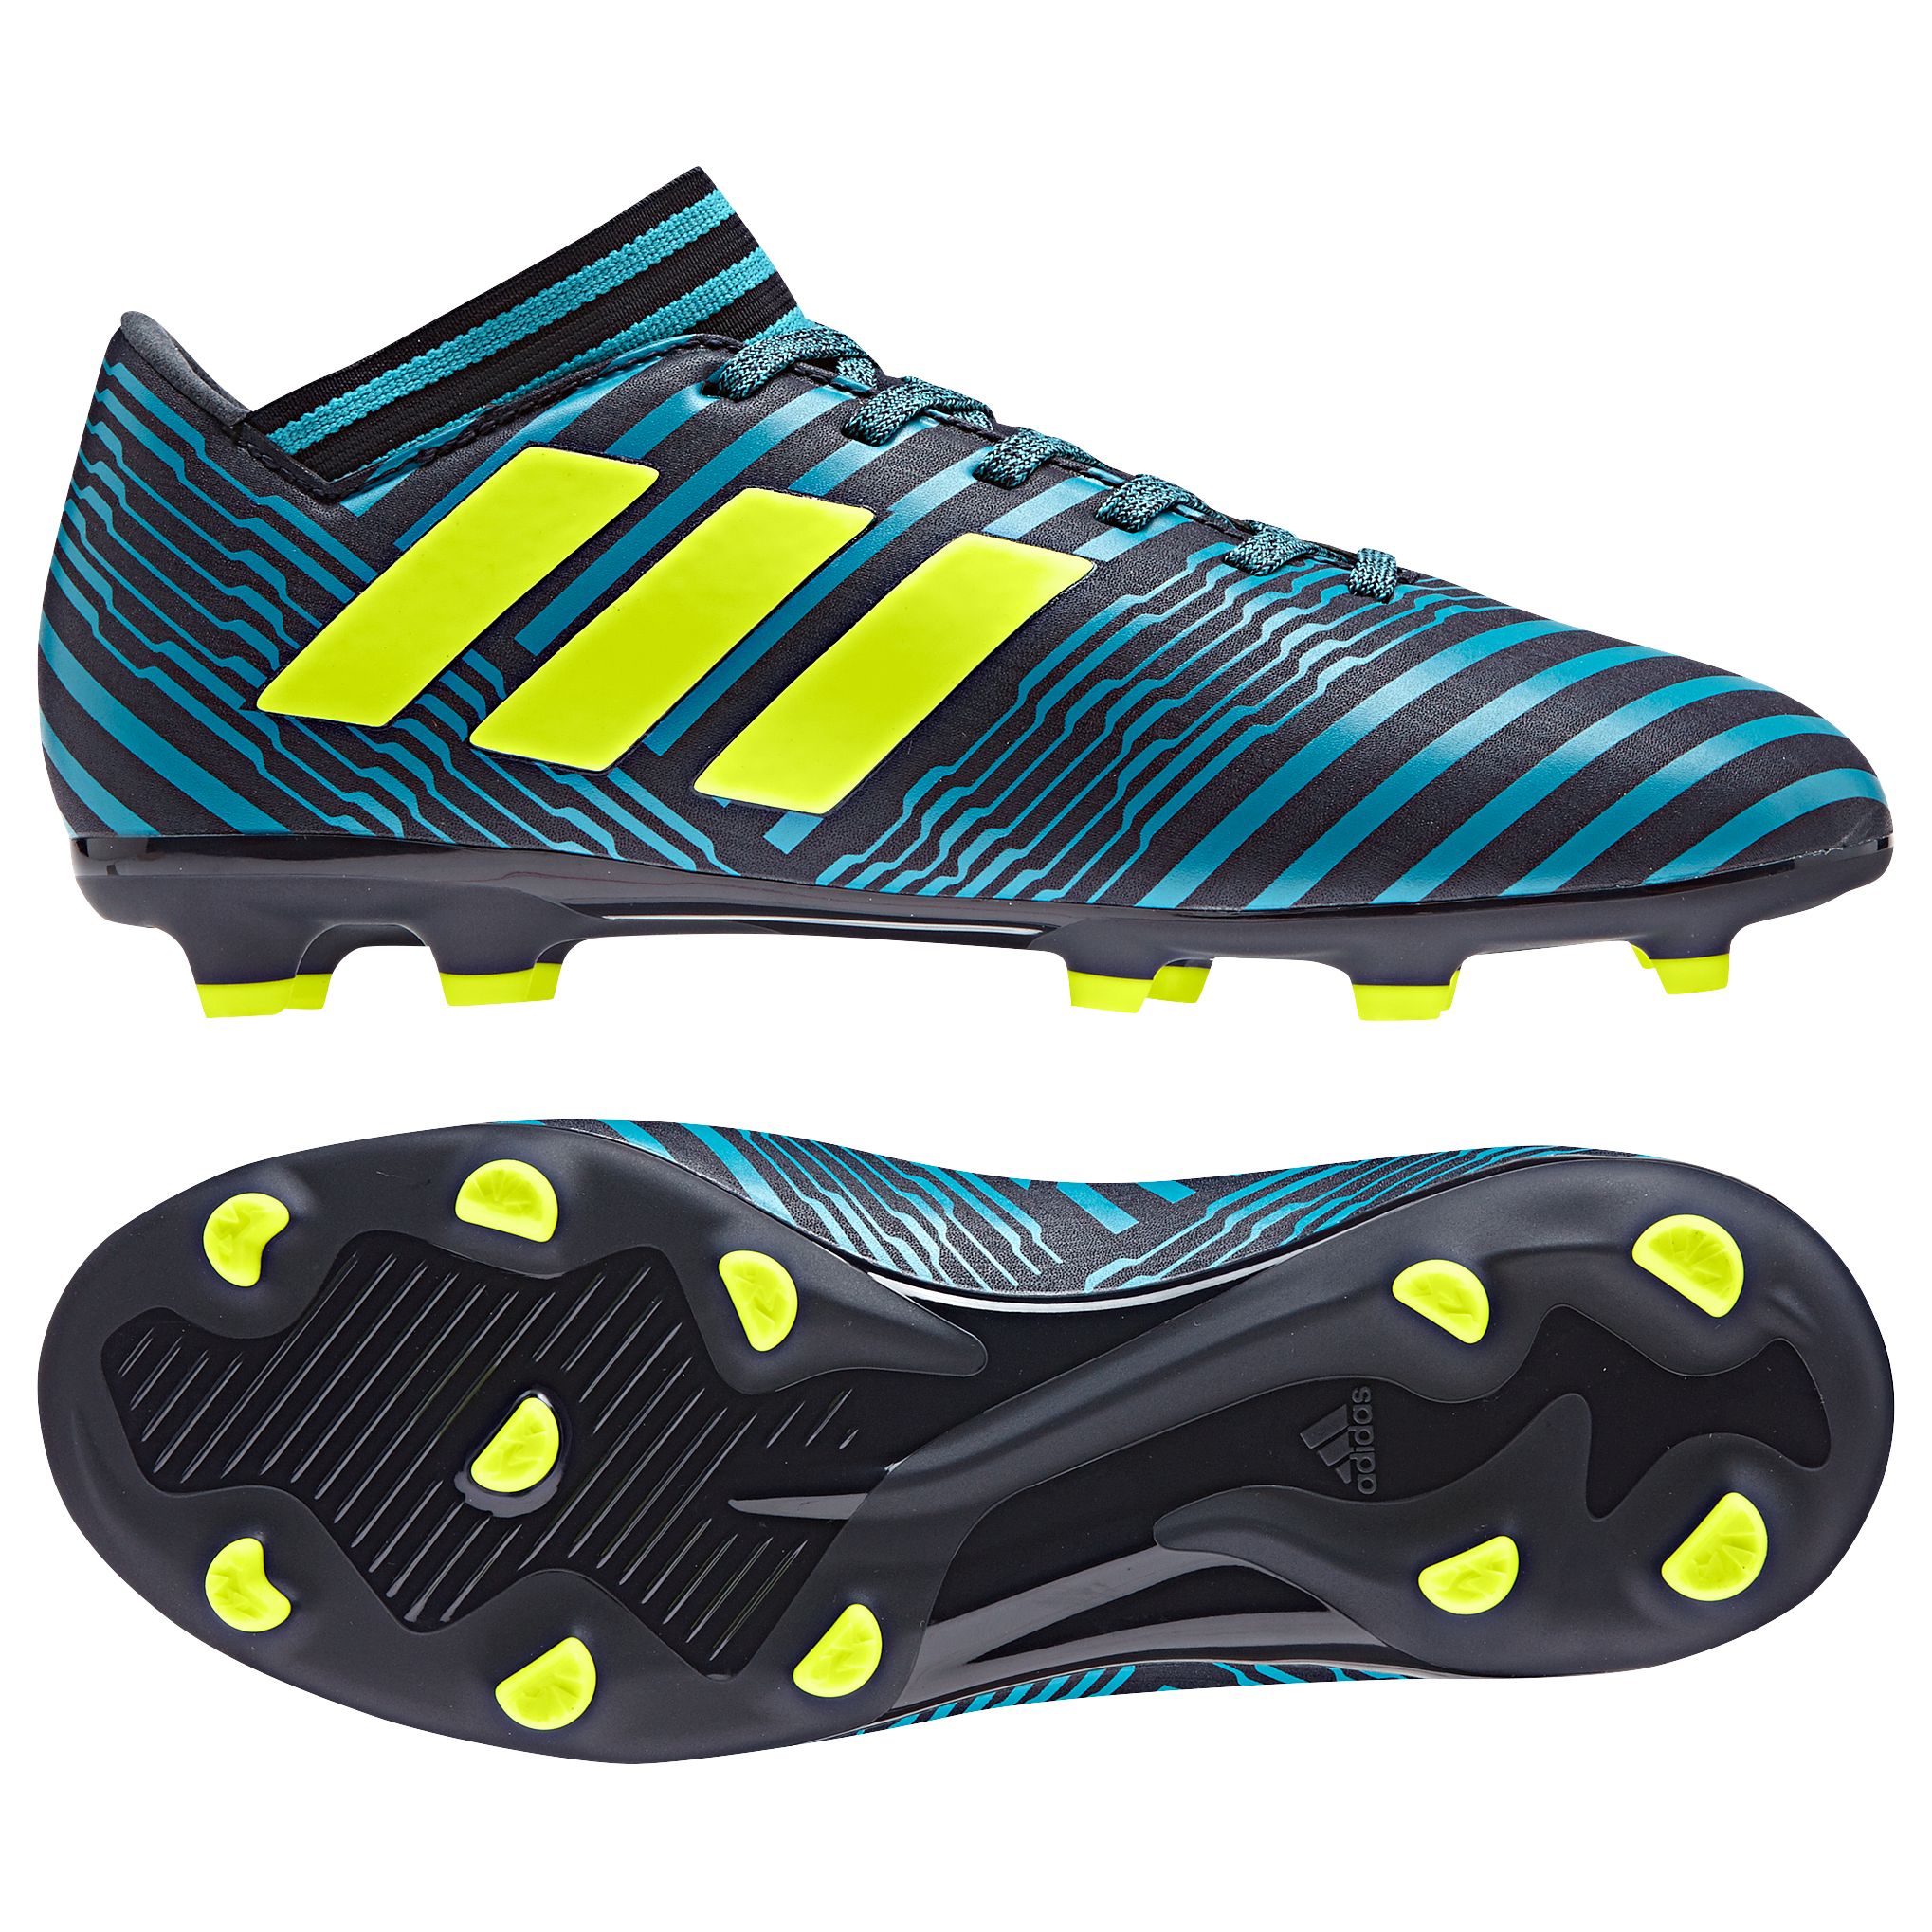 adidas black and blue football boots